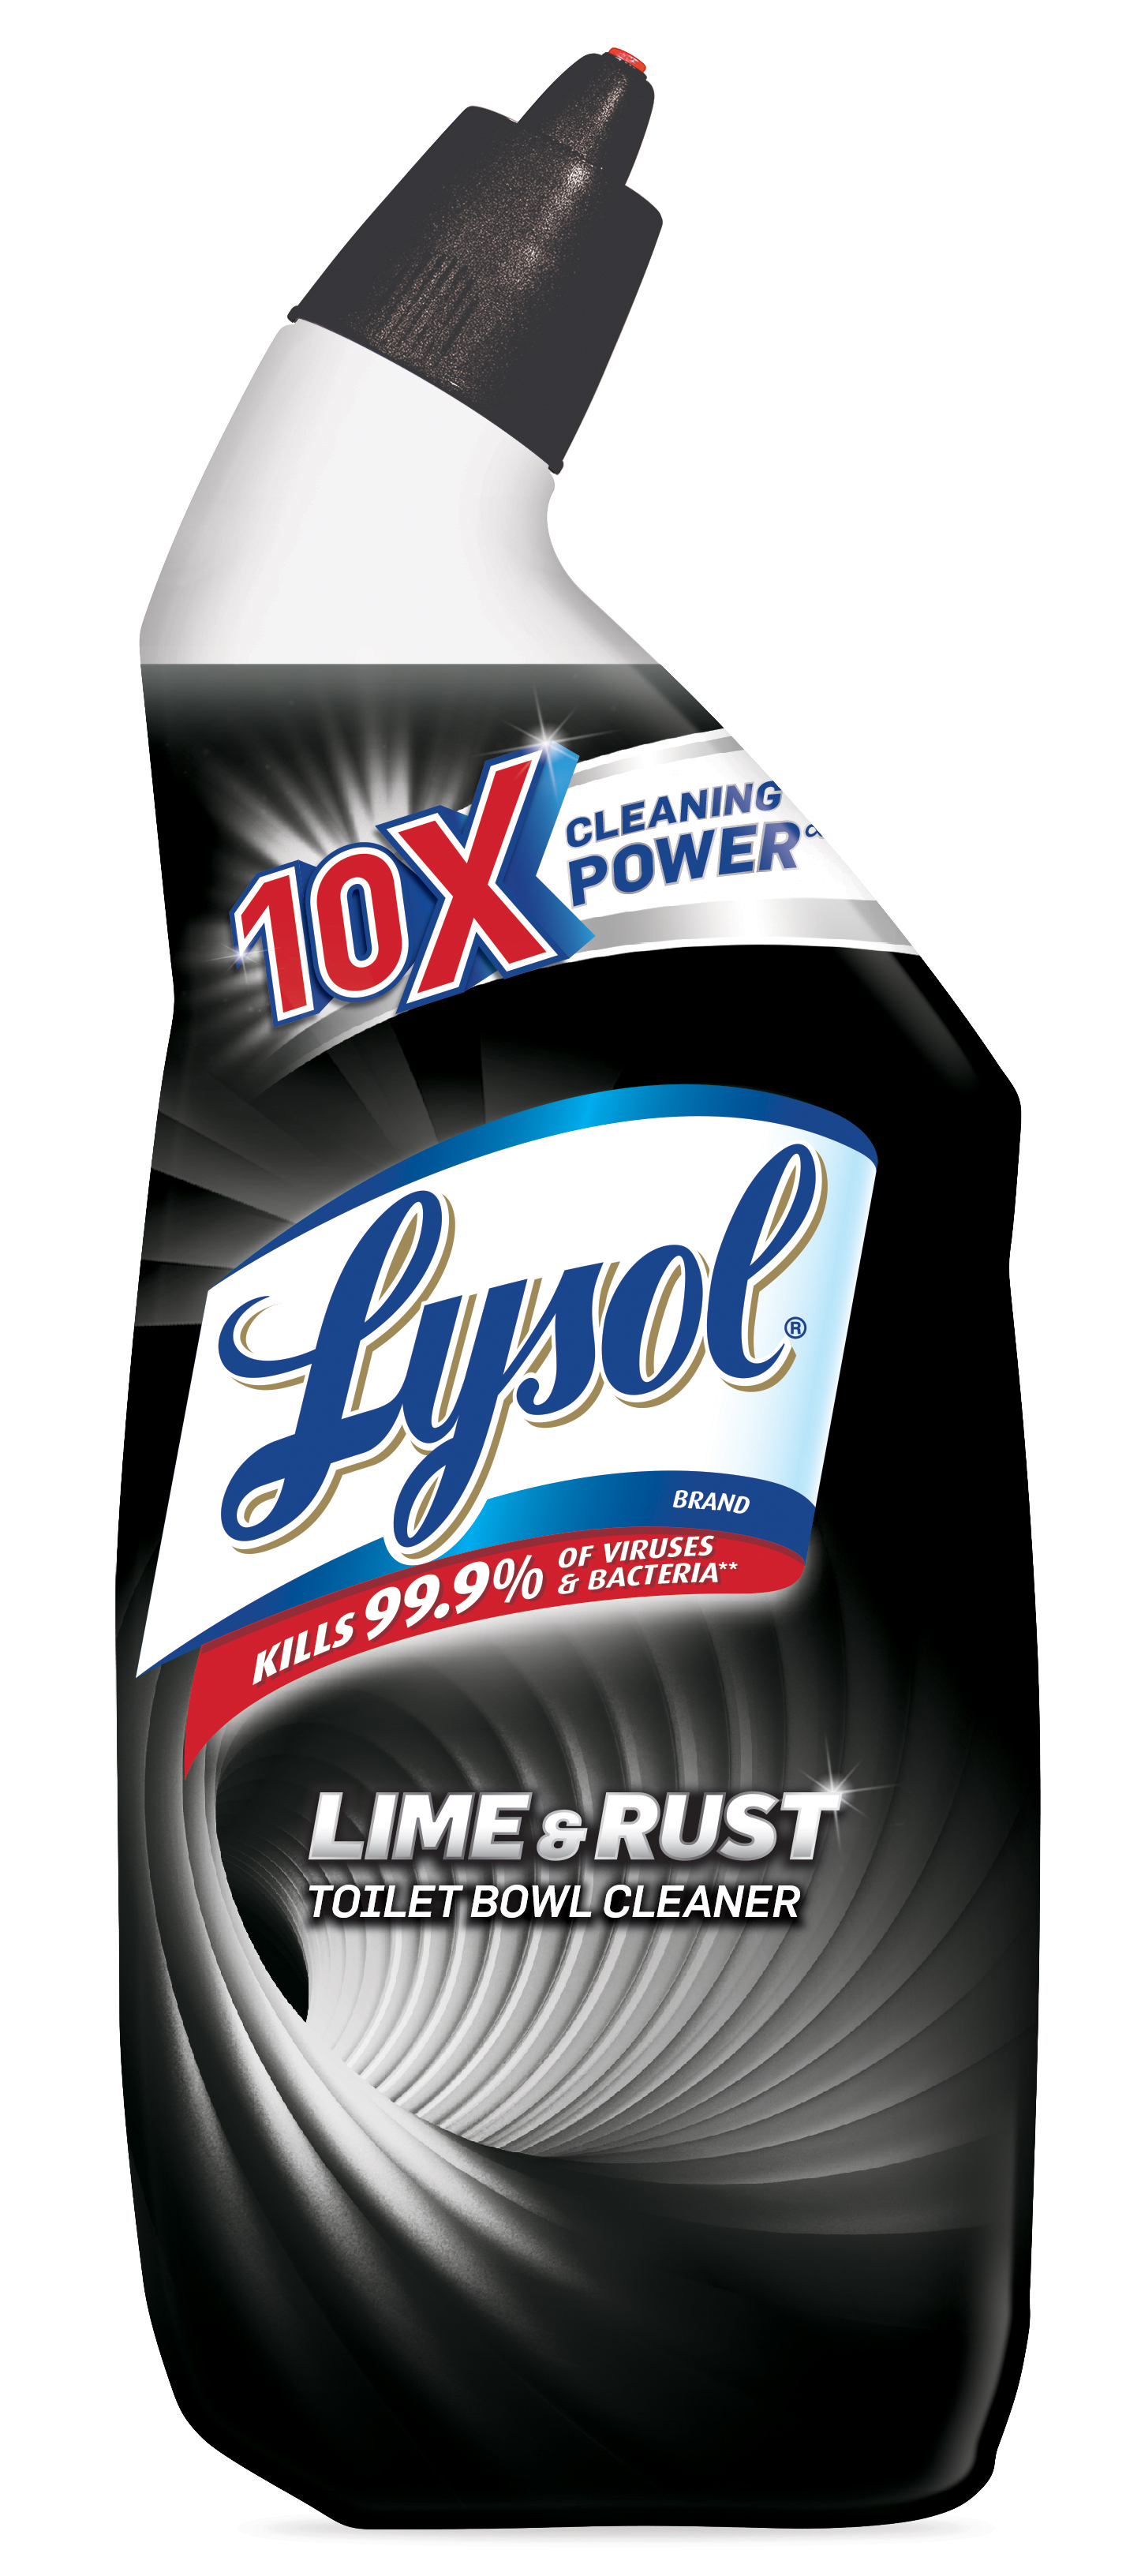 Lysol Toilet Bowl Cleaner Gel, for Cleaning and and Disinfecting, Removes Lime and Rust, 24oz - image 1 of 8